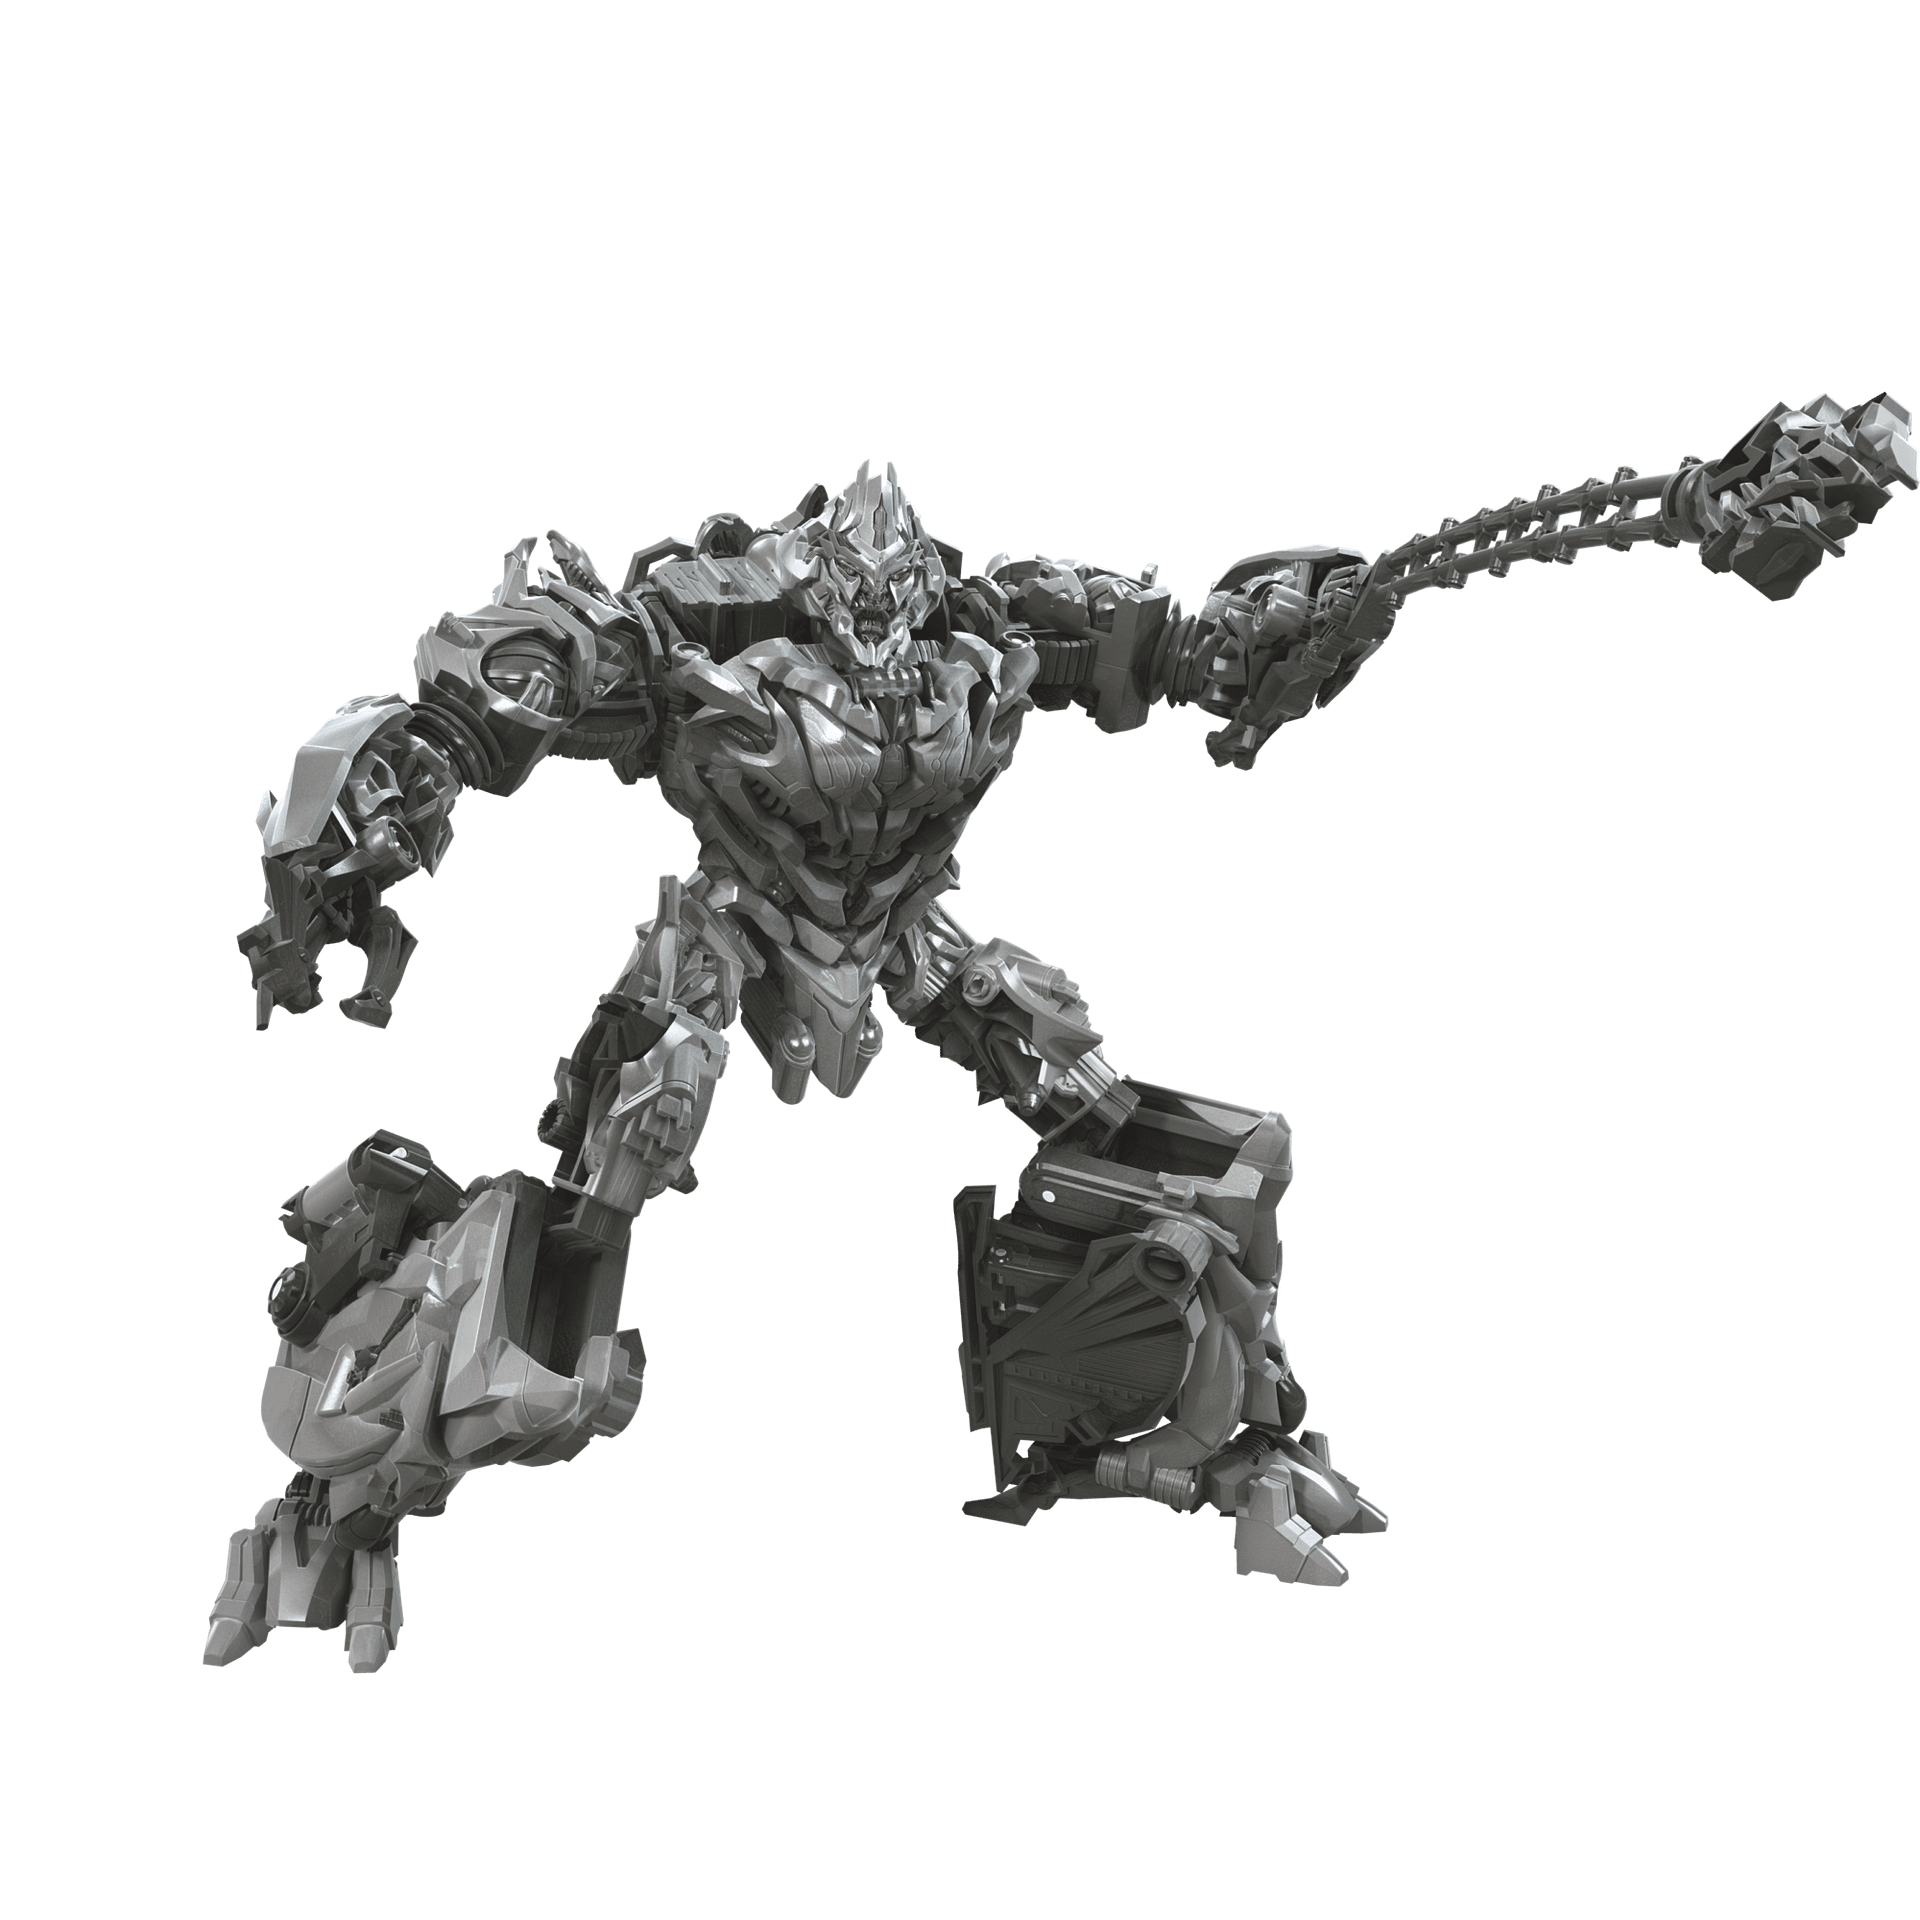 Six New Transformers Revealed by Hasbro for FanExpo 2019